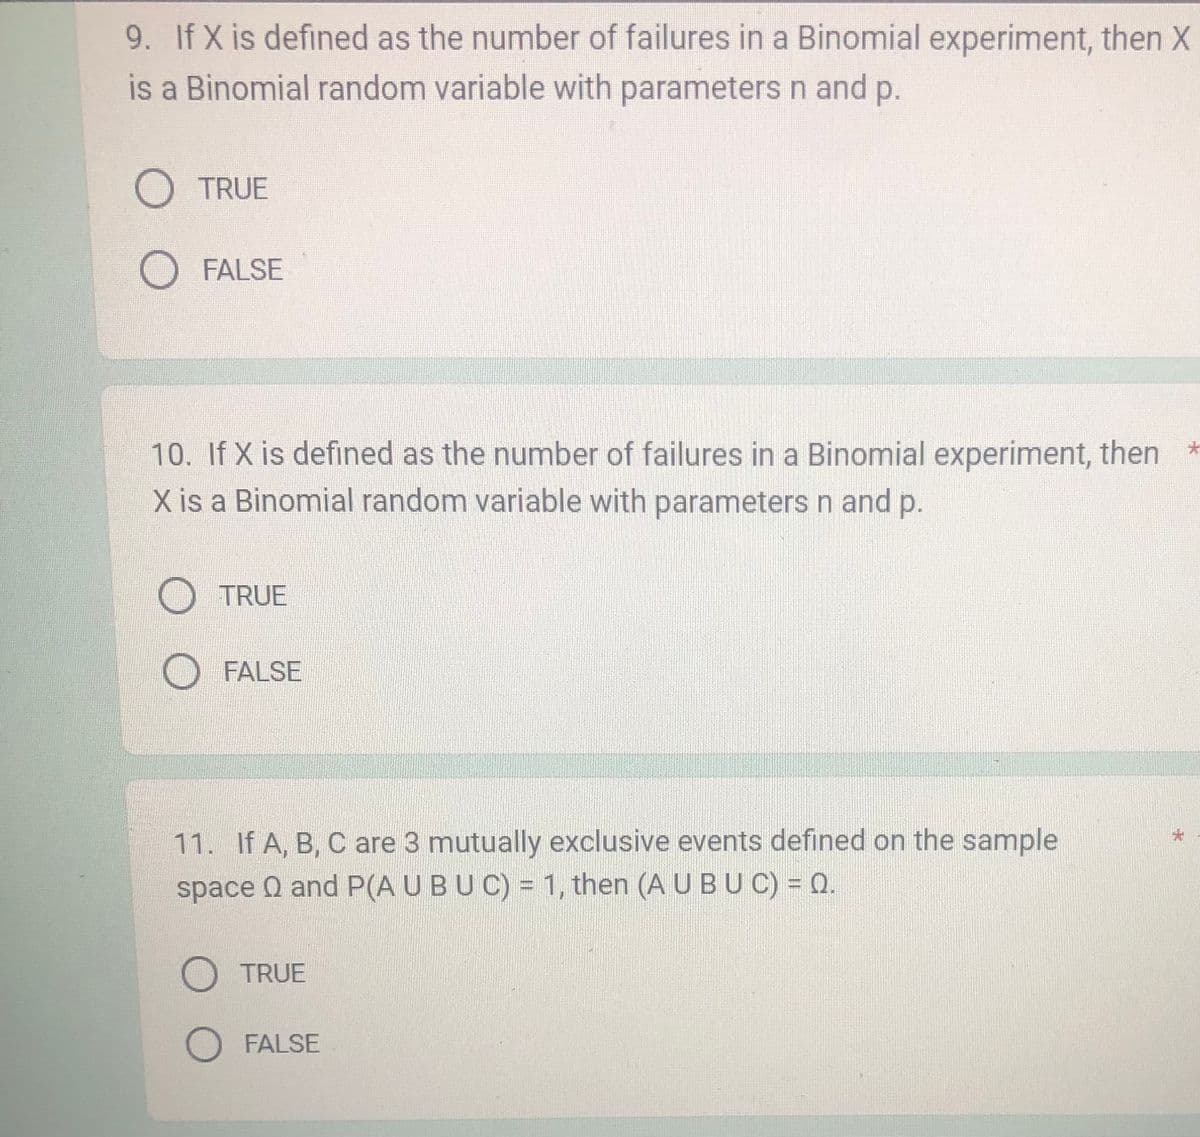 9. If X is defined as the number of failures in a Binomial experiment, then X
is a Binomial random variable with parameters n and p.
O TRUE
O FALSE
10. If X is defined as the number of failures in a Binomial experiment, then *
X is a Binomial random variable with parameters n and p.
TRUE
O FALSE
11. If A, B, C are 3 mutually exclusive events defined on the sample
space and P(A U BUC) = 1, then (A U BU C) = 0.
O TRUE
O FALSE